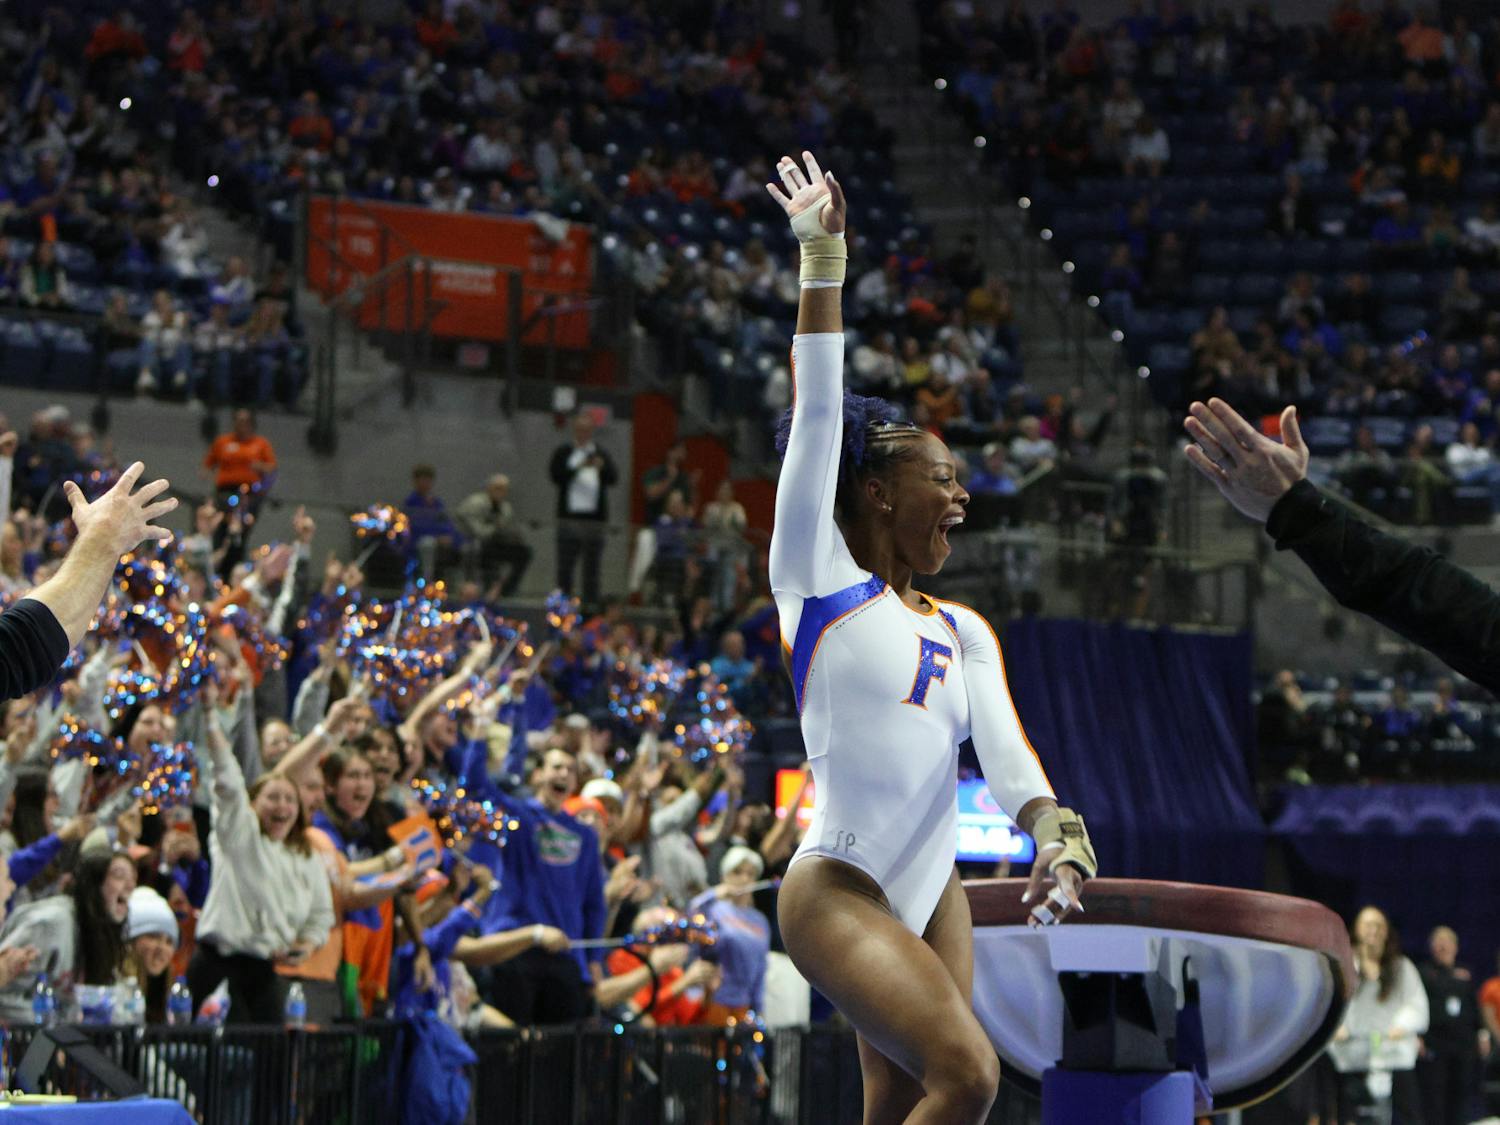 Florida gymnast Trinity Thomas celebrates after her vault routine against the Georgia Bulldogs Friday, Jan. 27, 2023. She earned a 10 on the event to finish her fourth career gym slam.